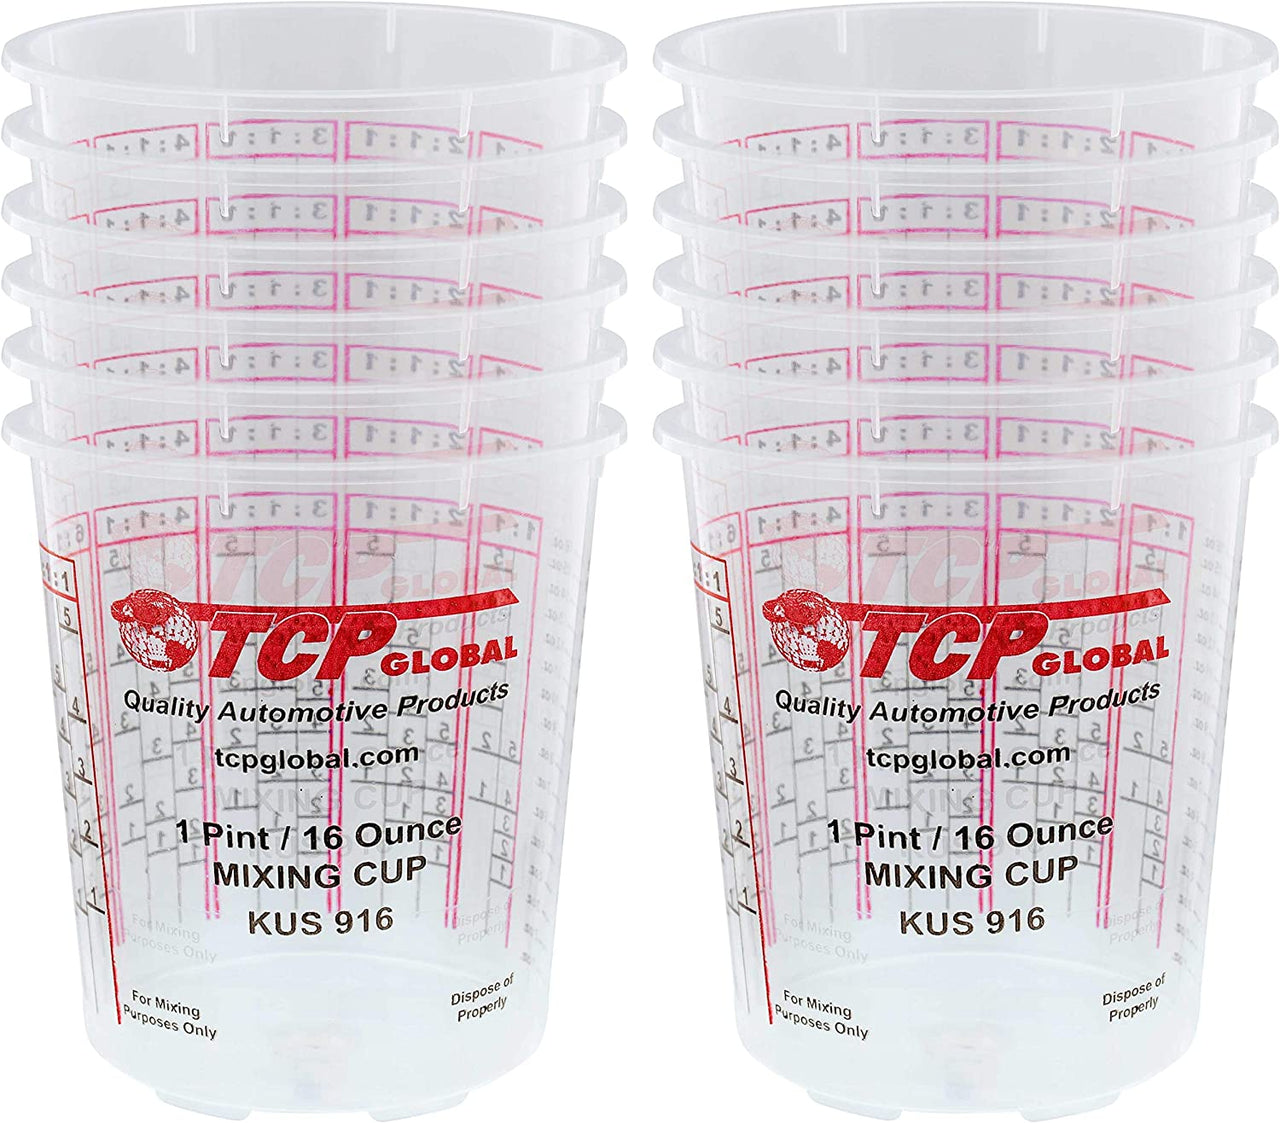 16oz Measuring Cups – One Stop Epoxy